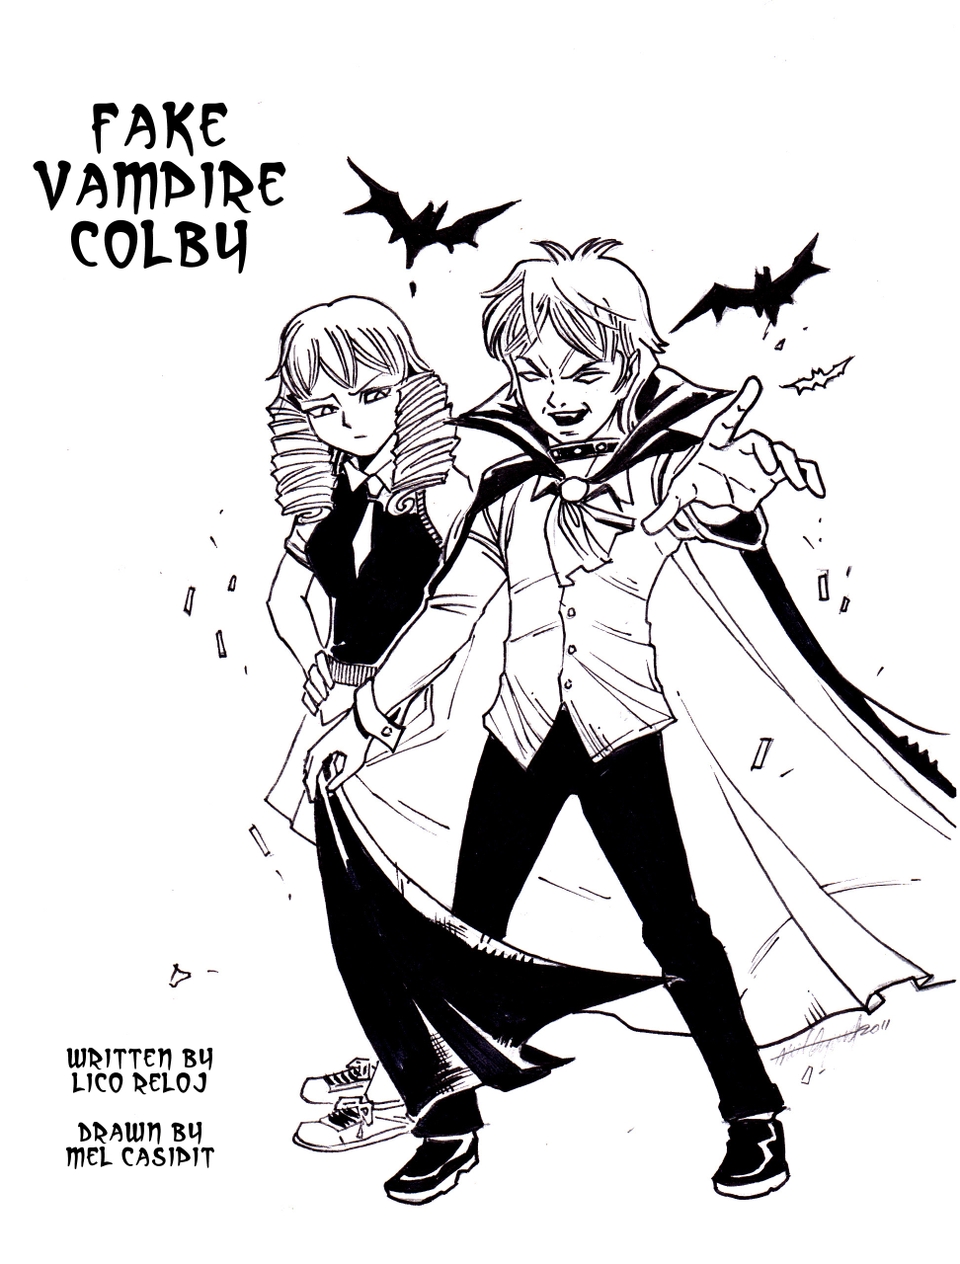 Fake Vampire Colby cover